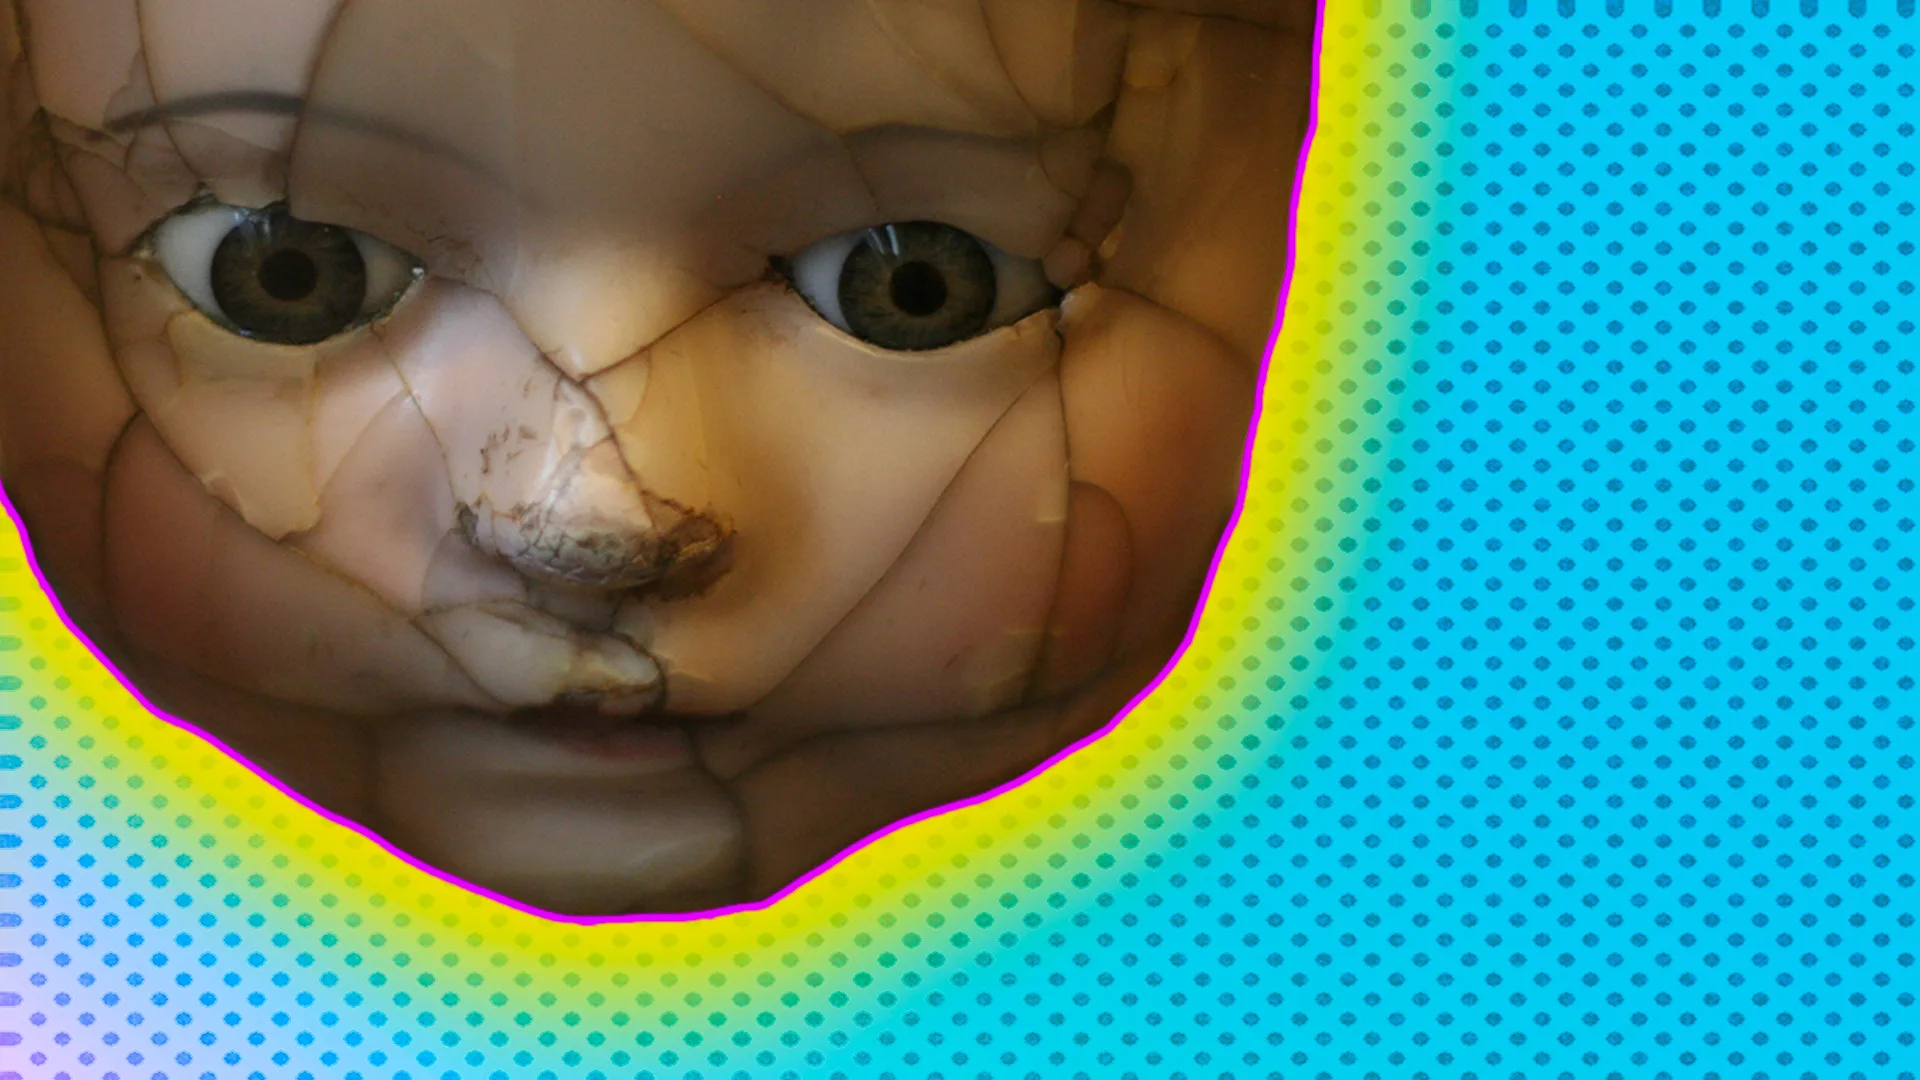 Broken doll face with a polkadot background and a glow around the image